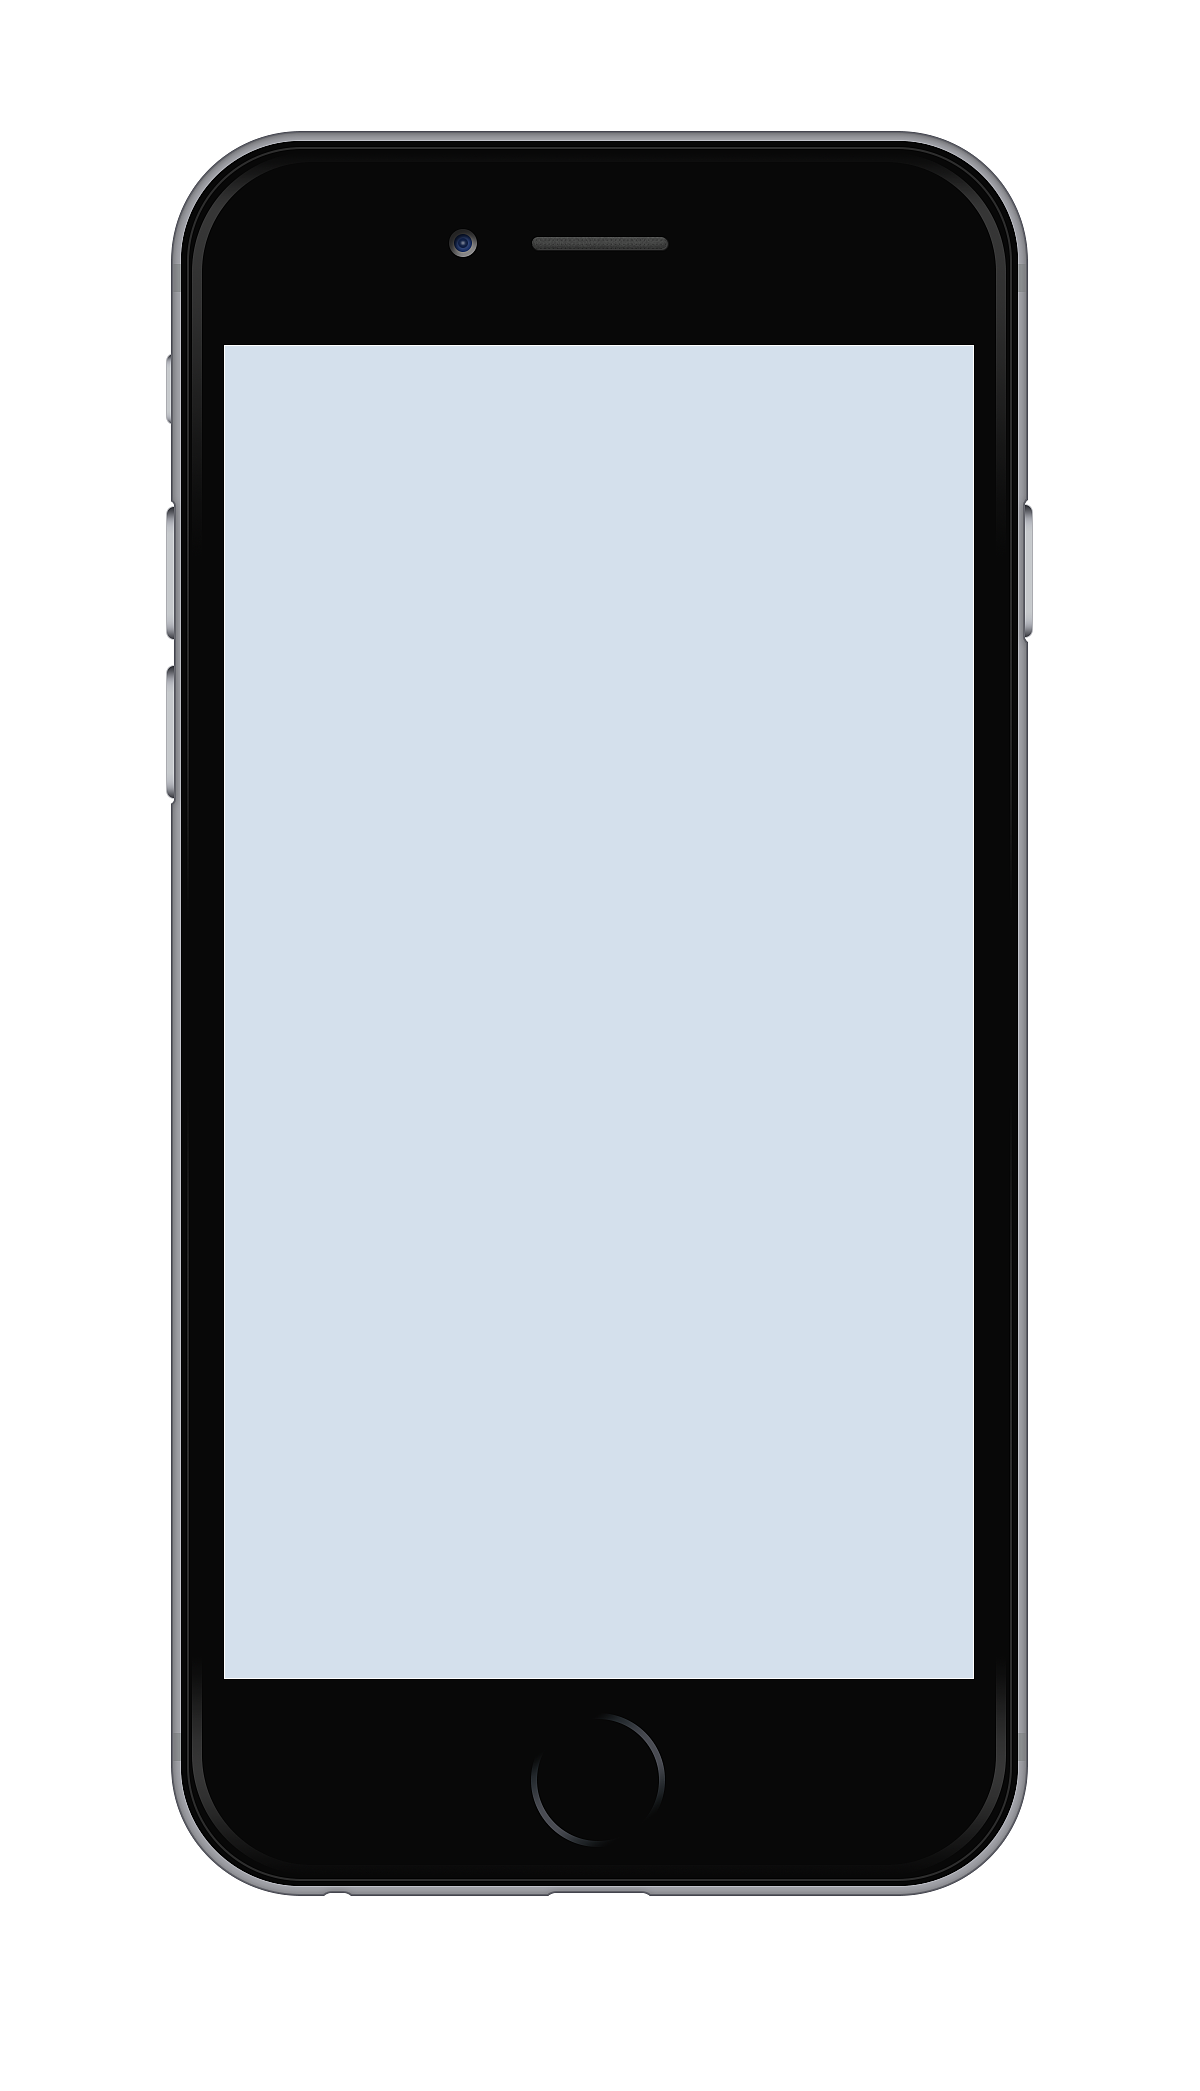 iphone 6 PNG Image for Free Download